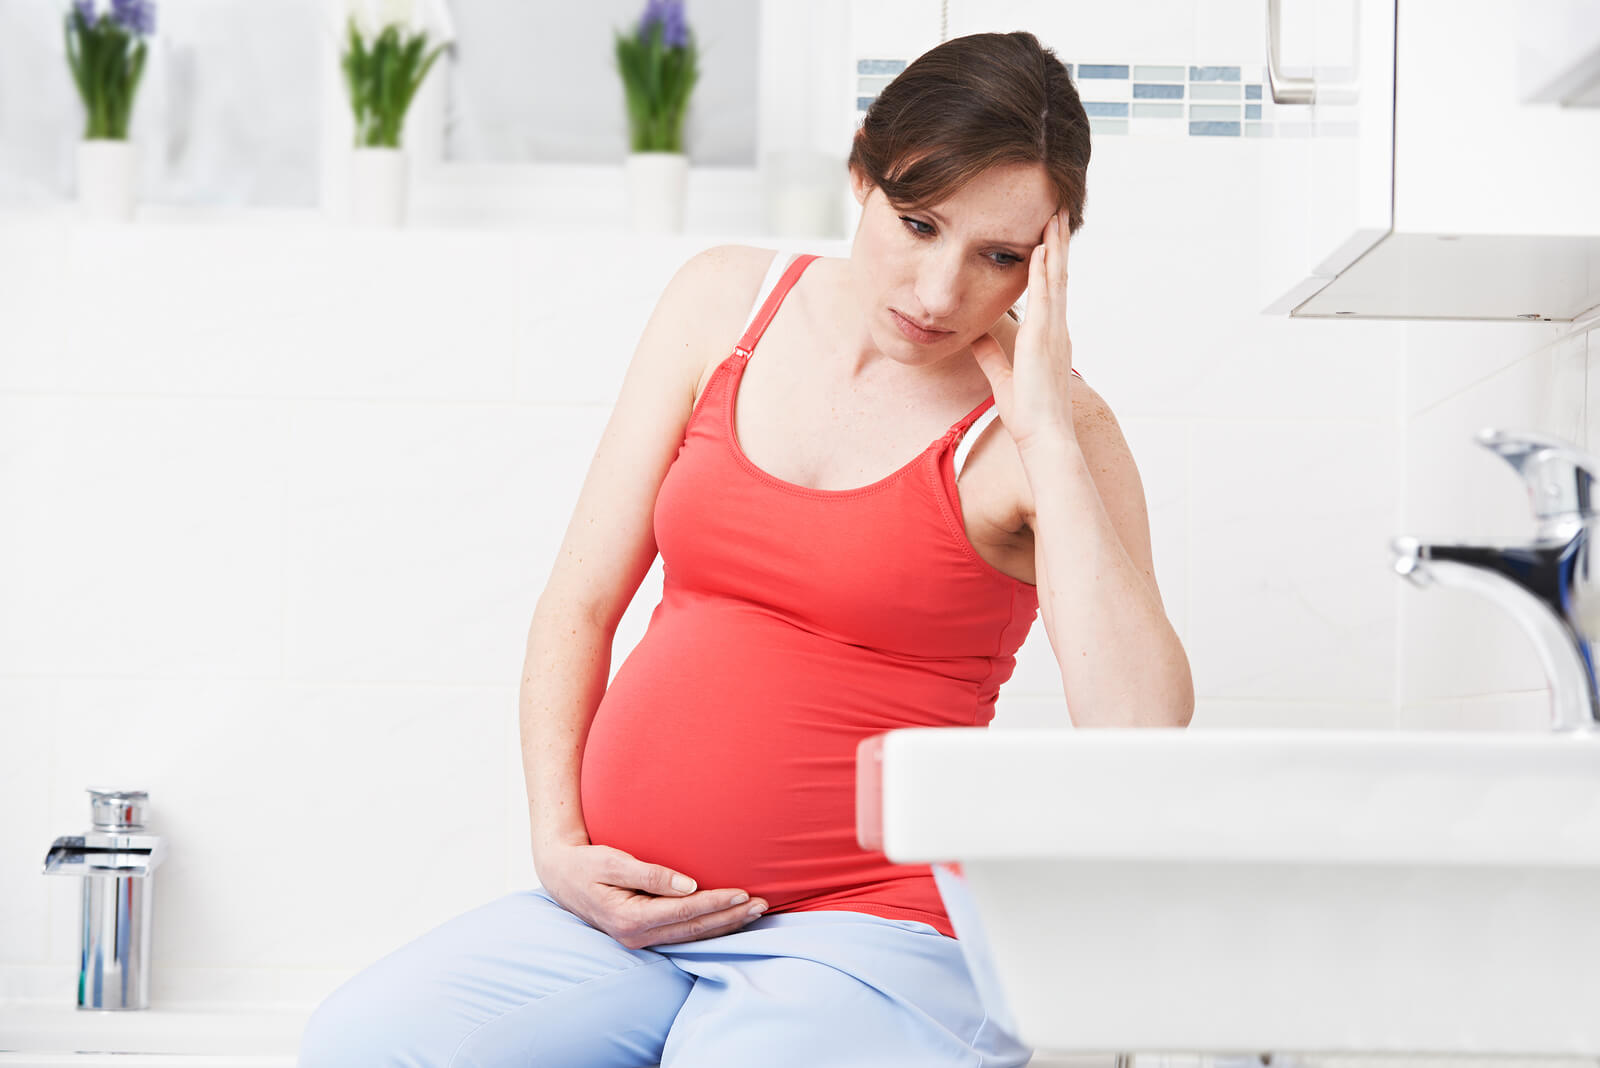 Medications for Nausea and Vomiting During Pregnancy